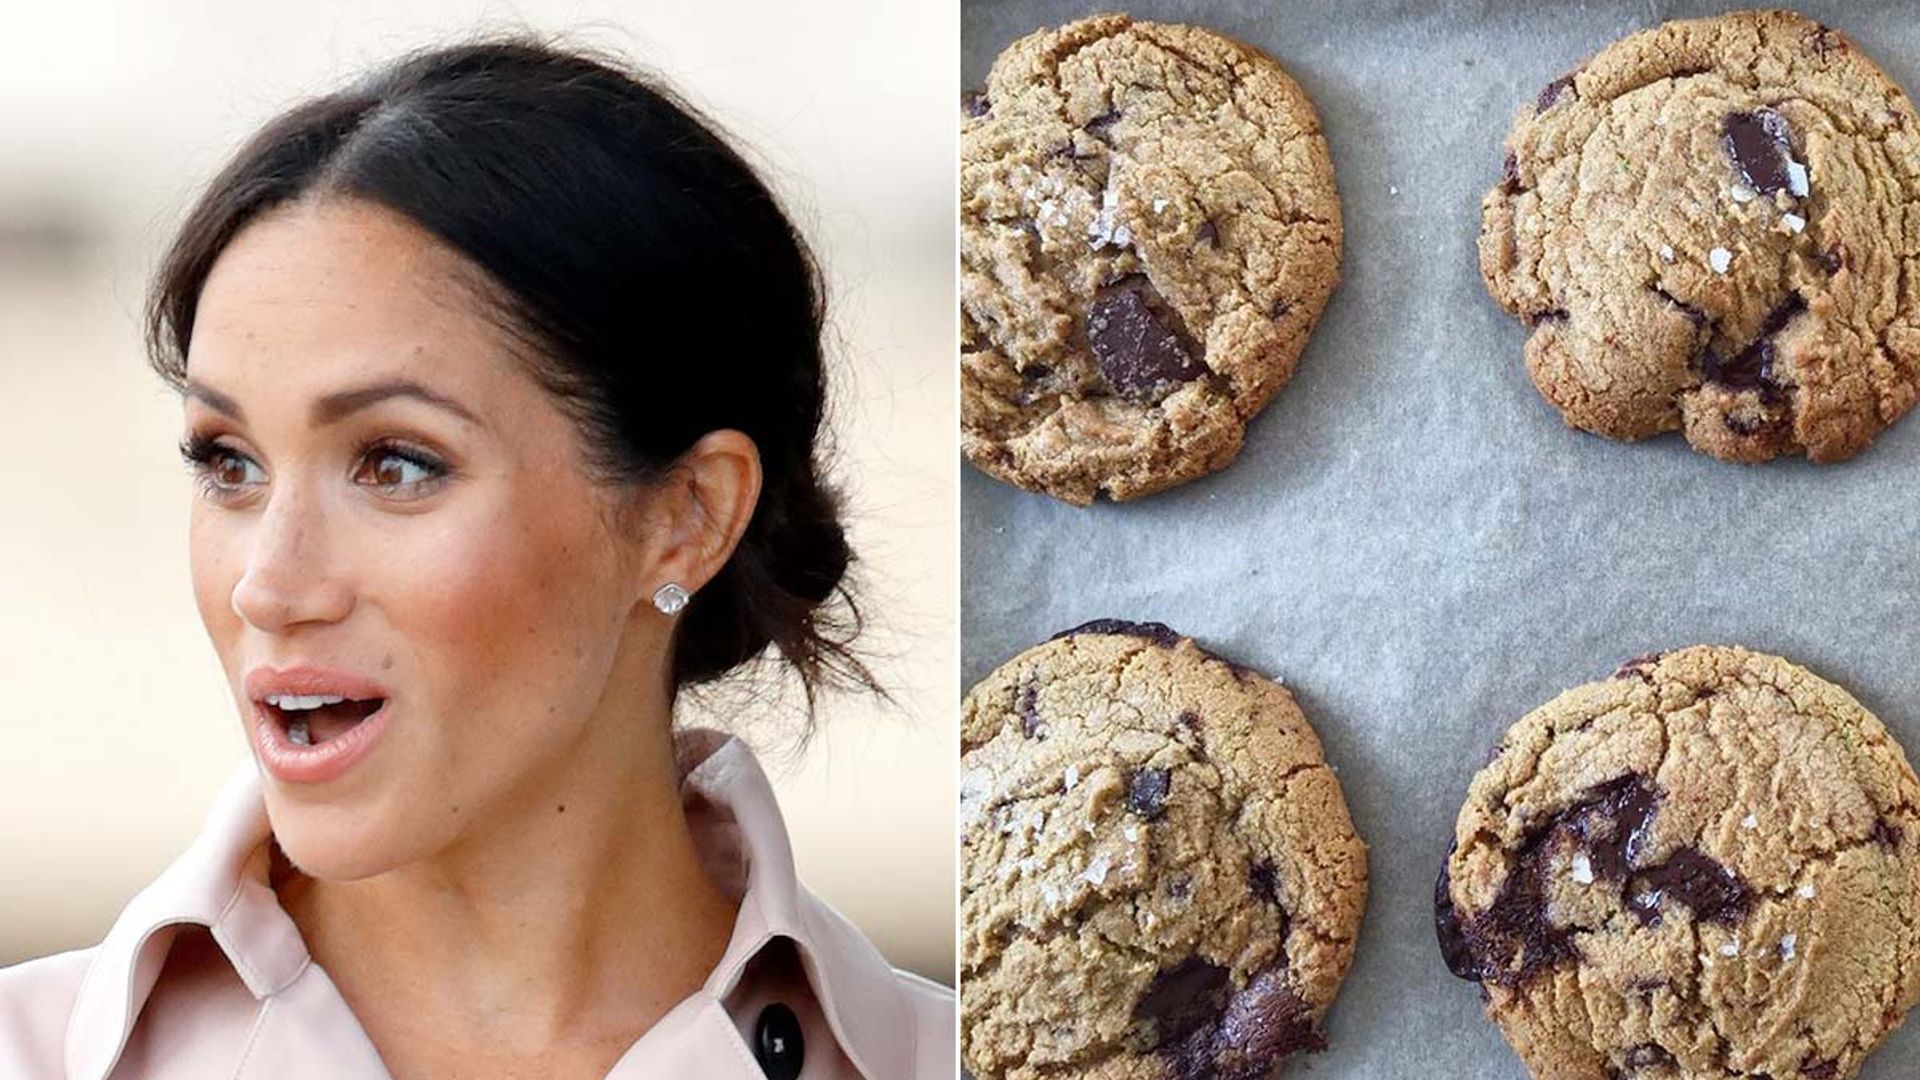 Meghan Markle's wedding cake designer just shared her coveted cookie recipe